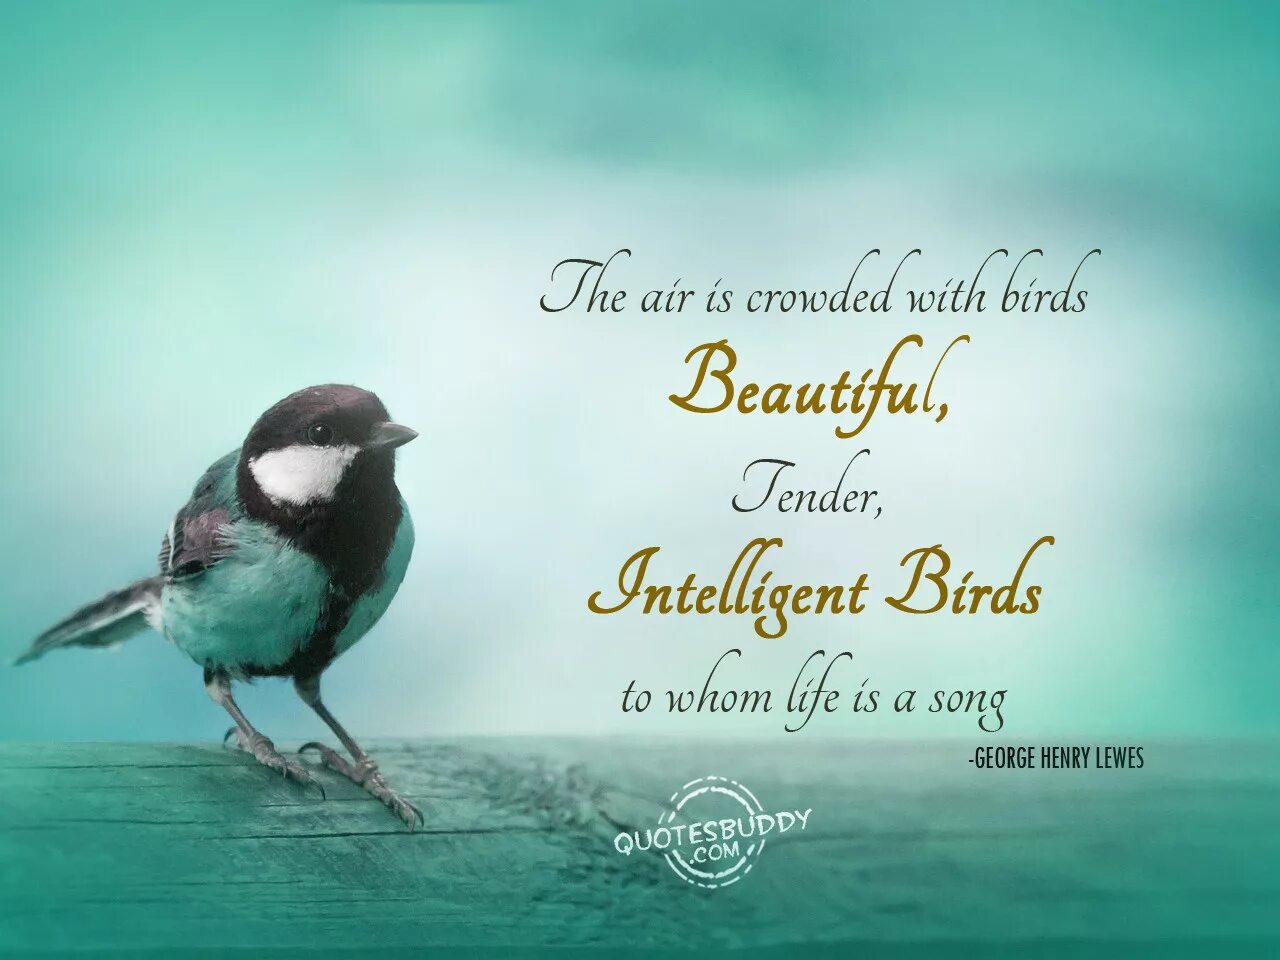 Quotes with Birds. Quotes about Birds. Beautiful Birds бренд. Quotes about early Birds. Birds депозит